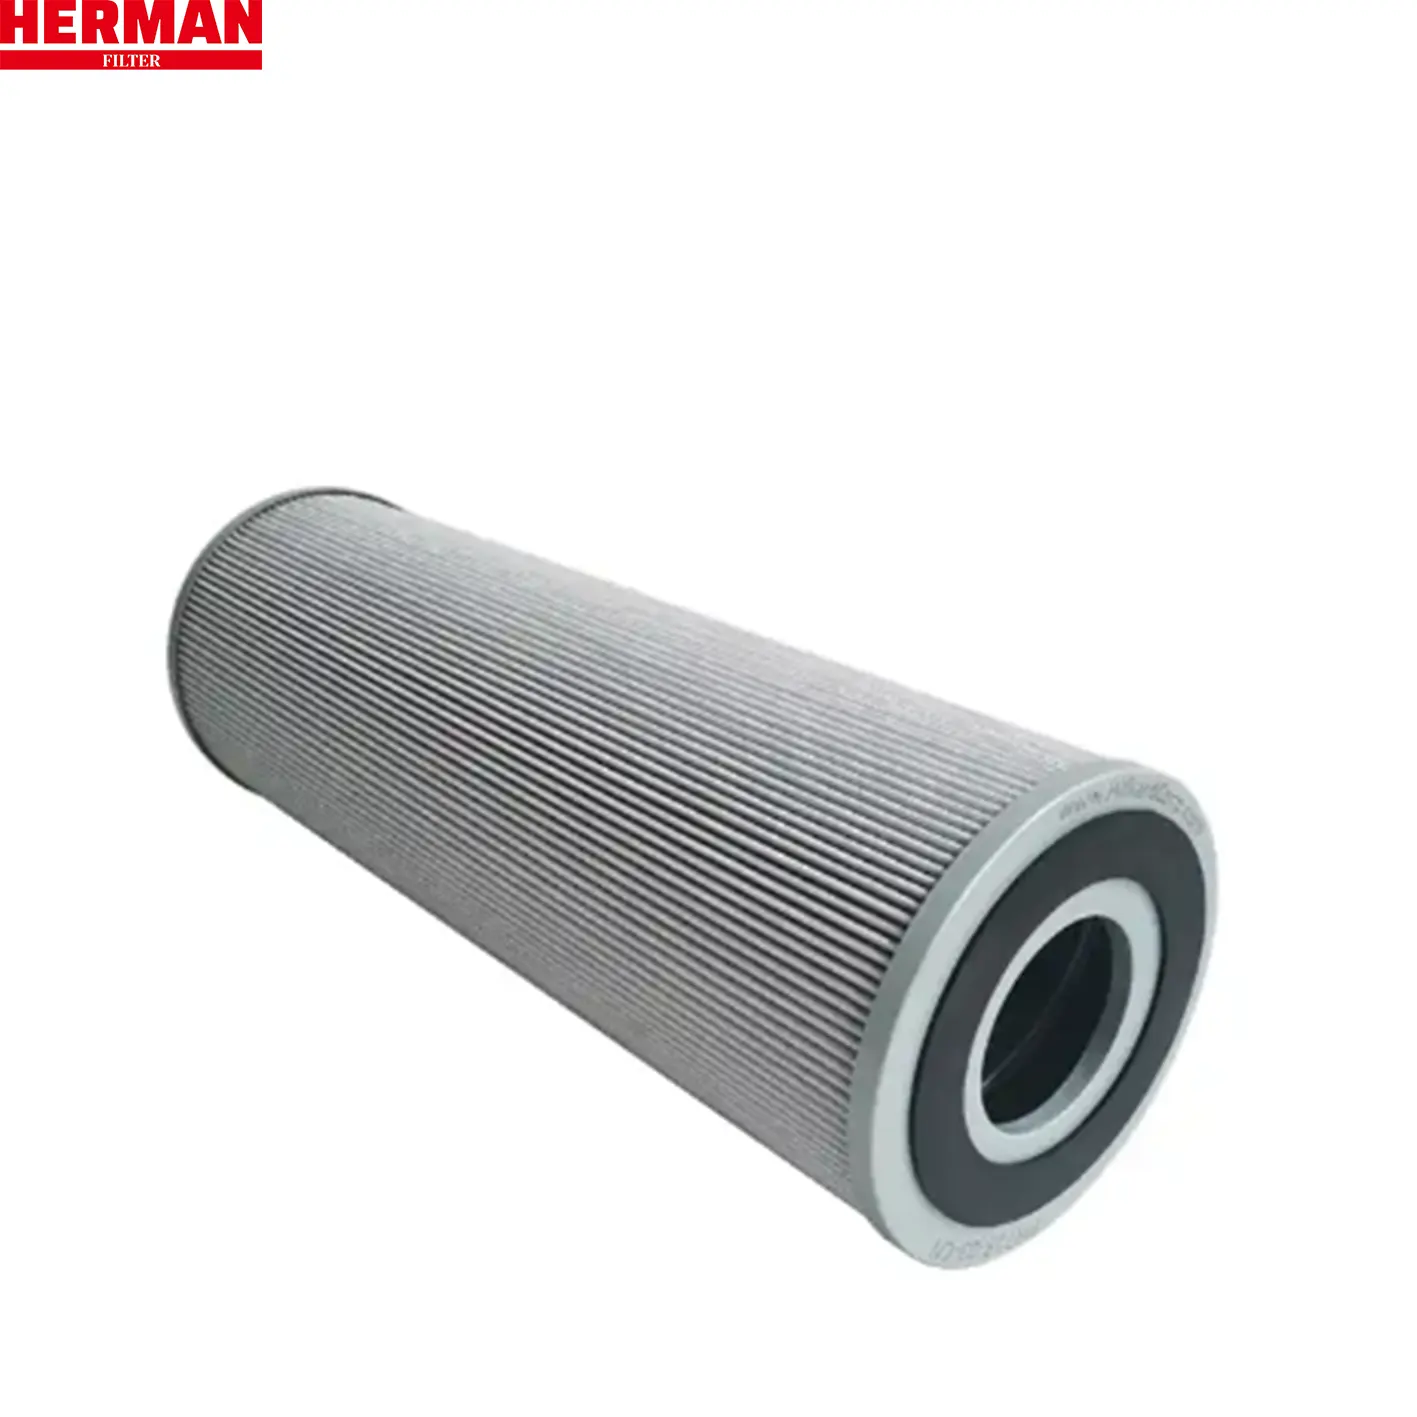 Manufacturer's Choice Carbon Air Filter Element with Housing Clean Air Solution for Cars Car Gas Filter